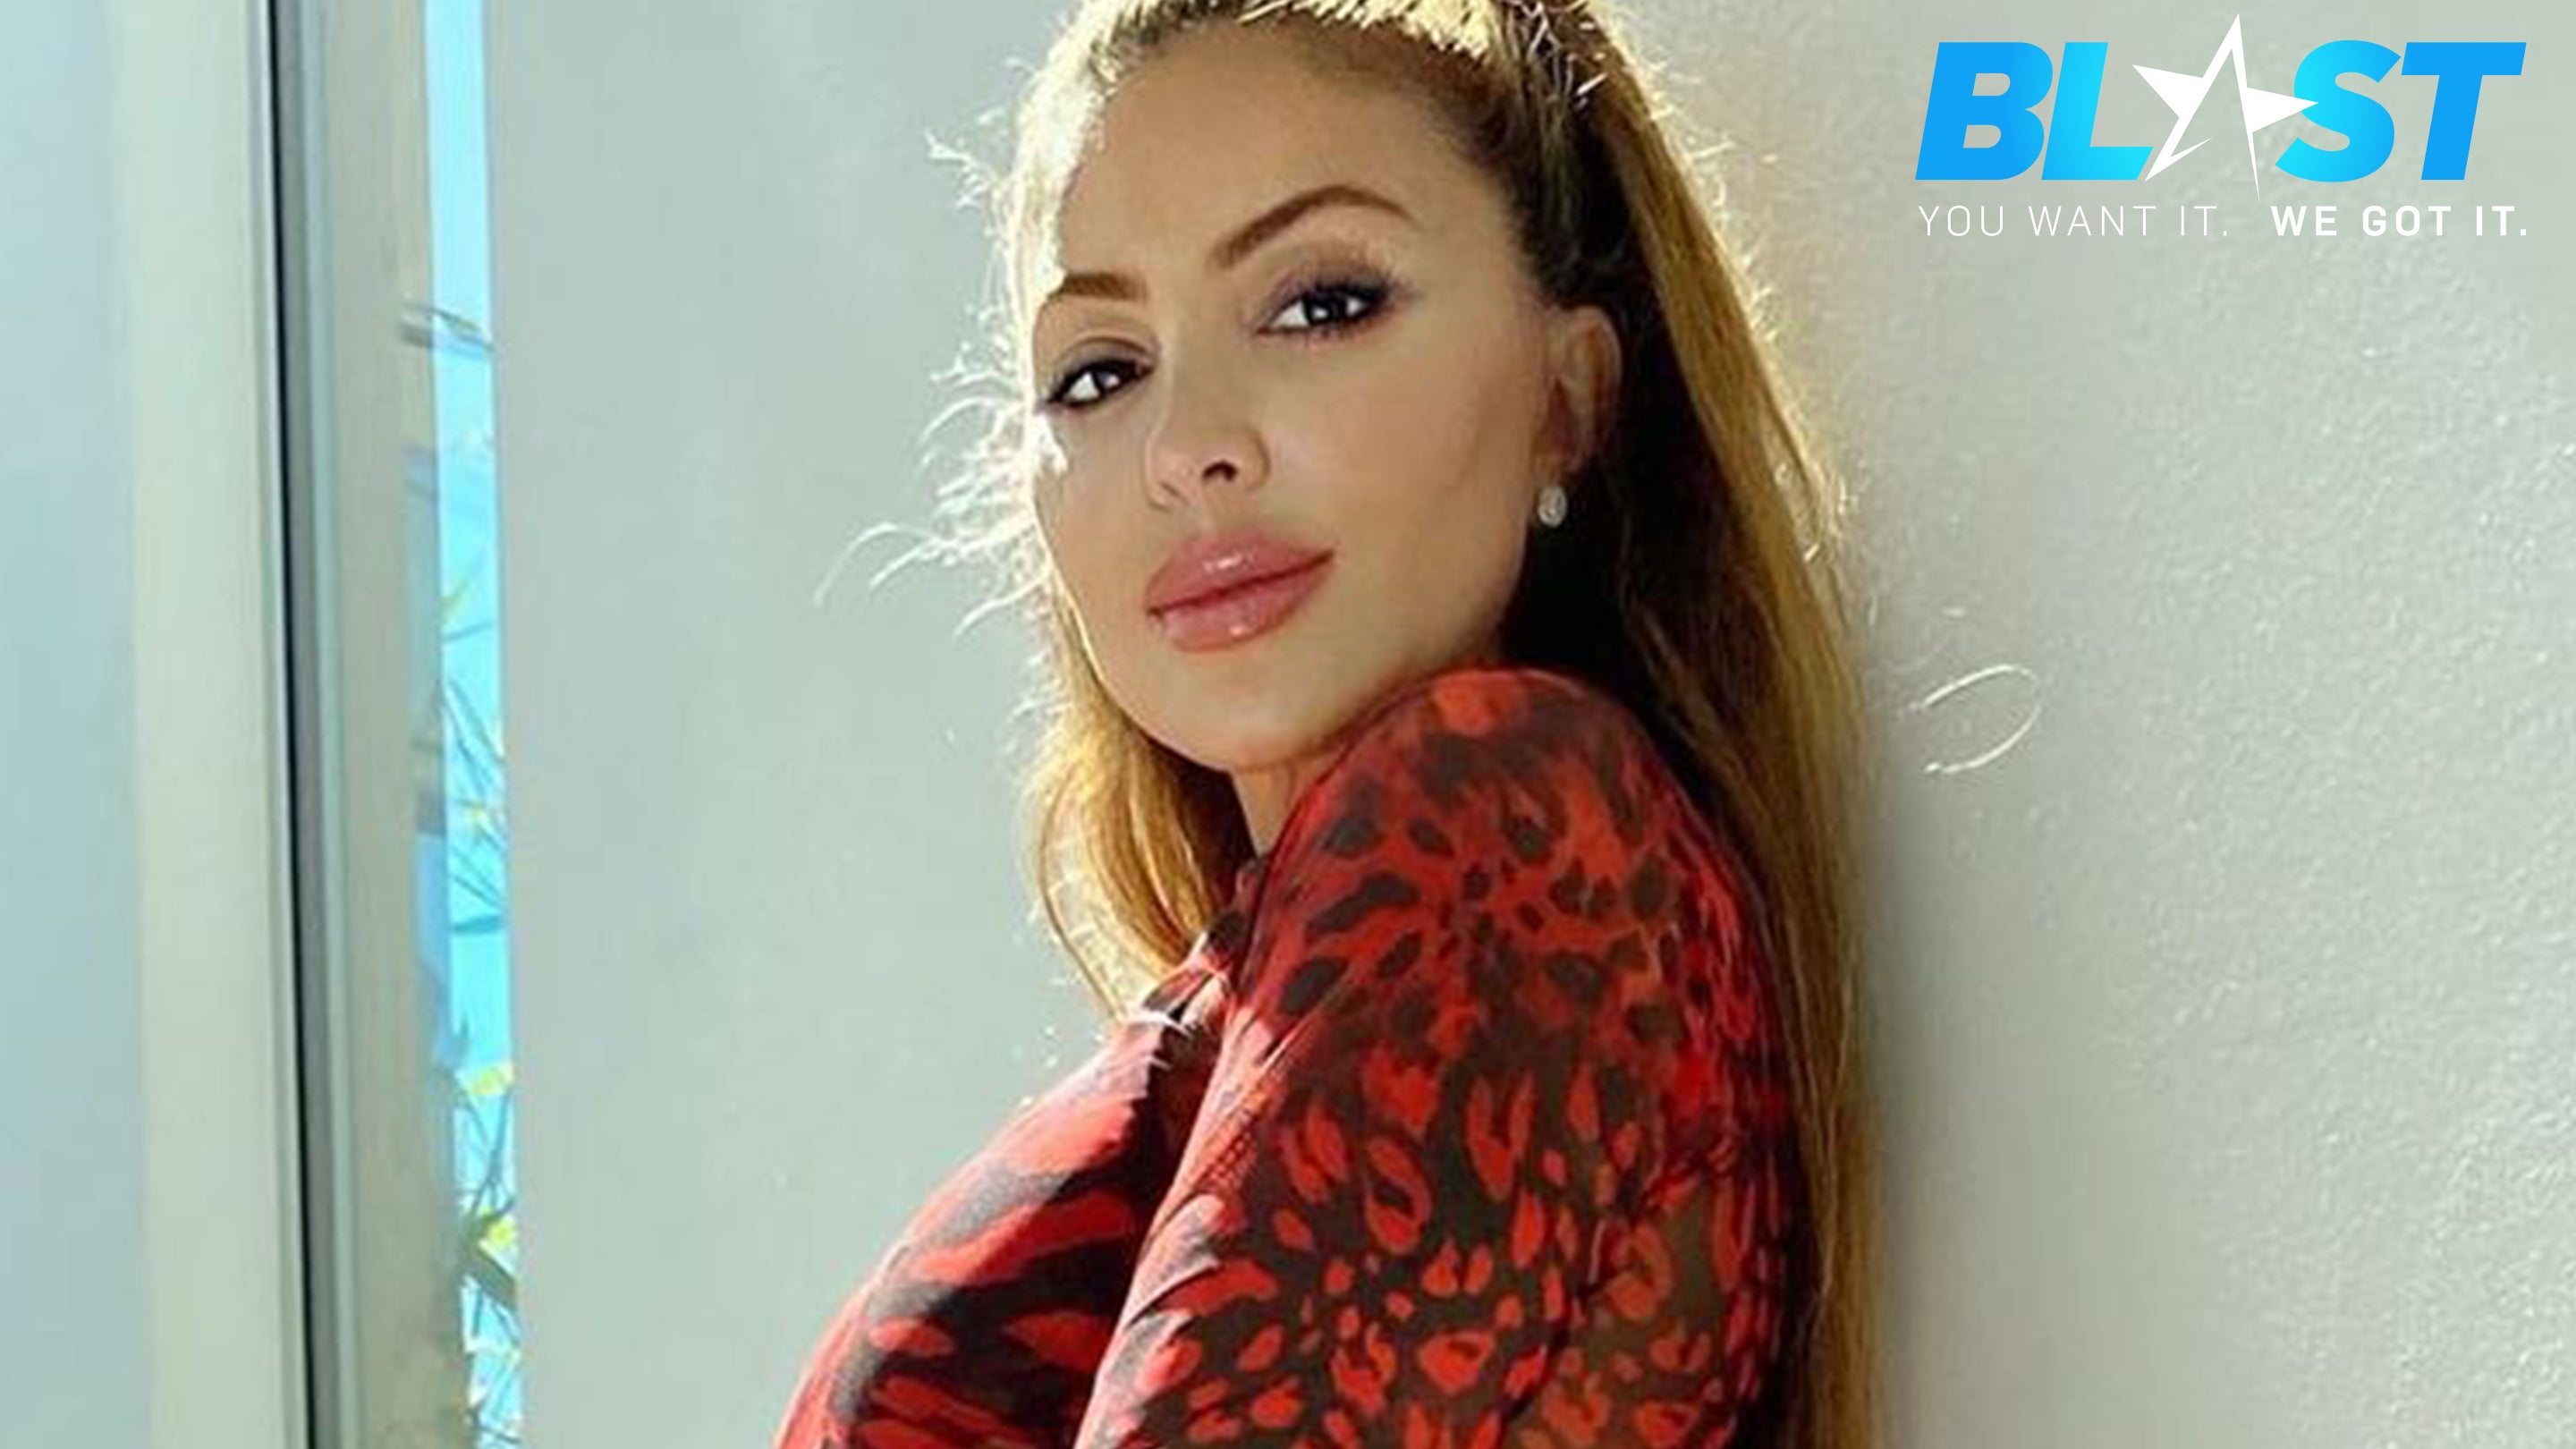 Larsa Pippen's Announces New Career Move While Dripping Wet Amid Kardashian Drama